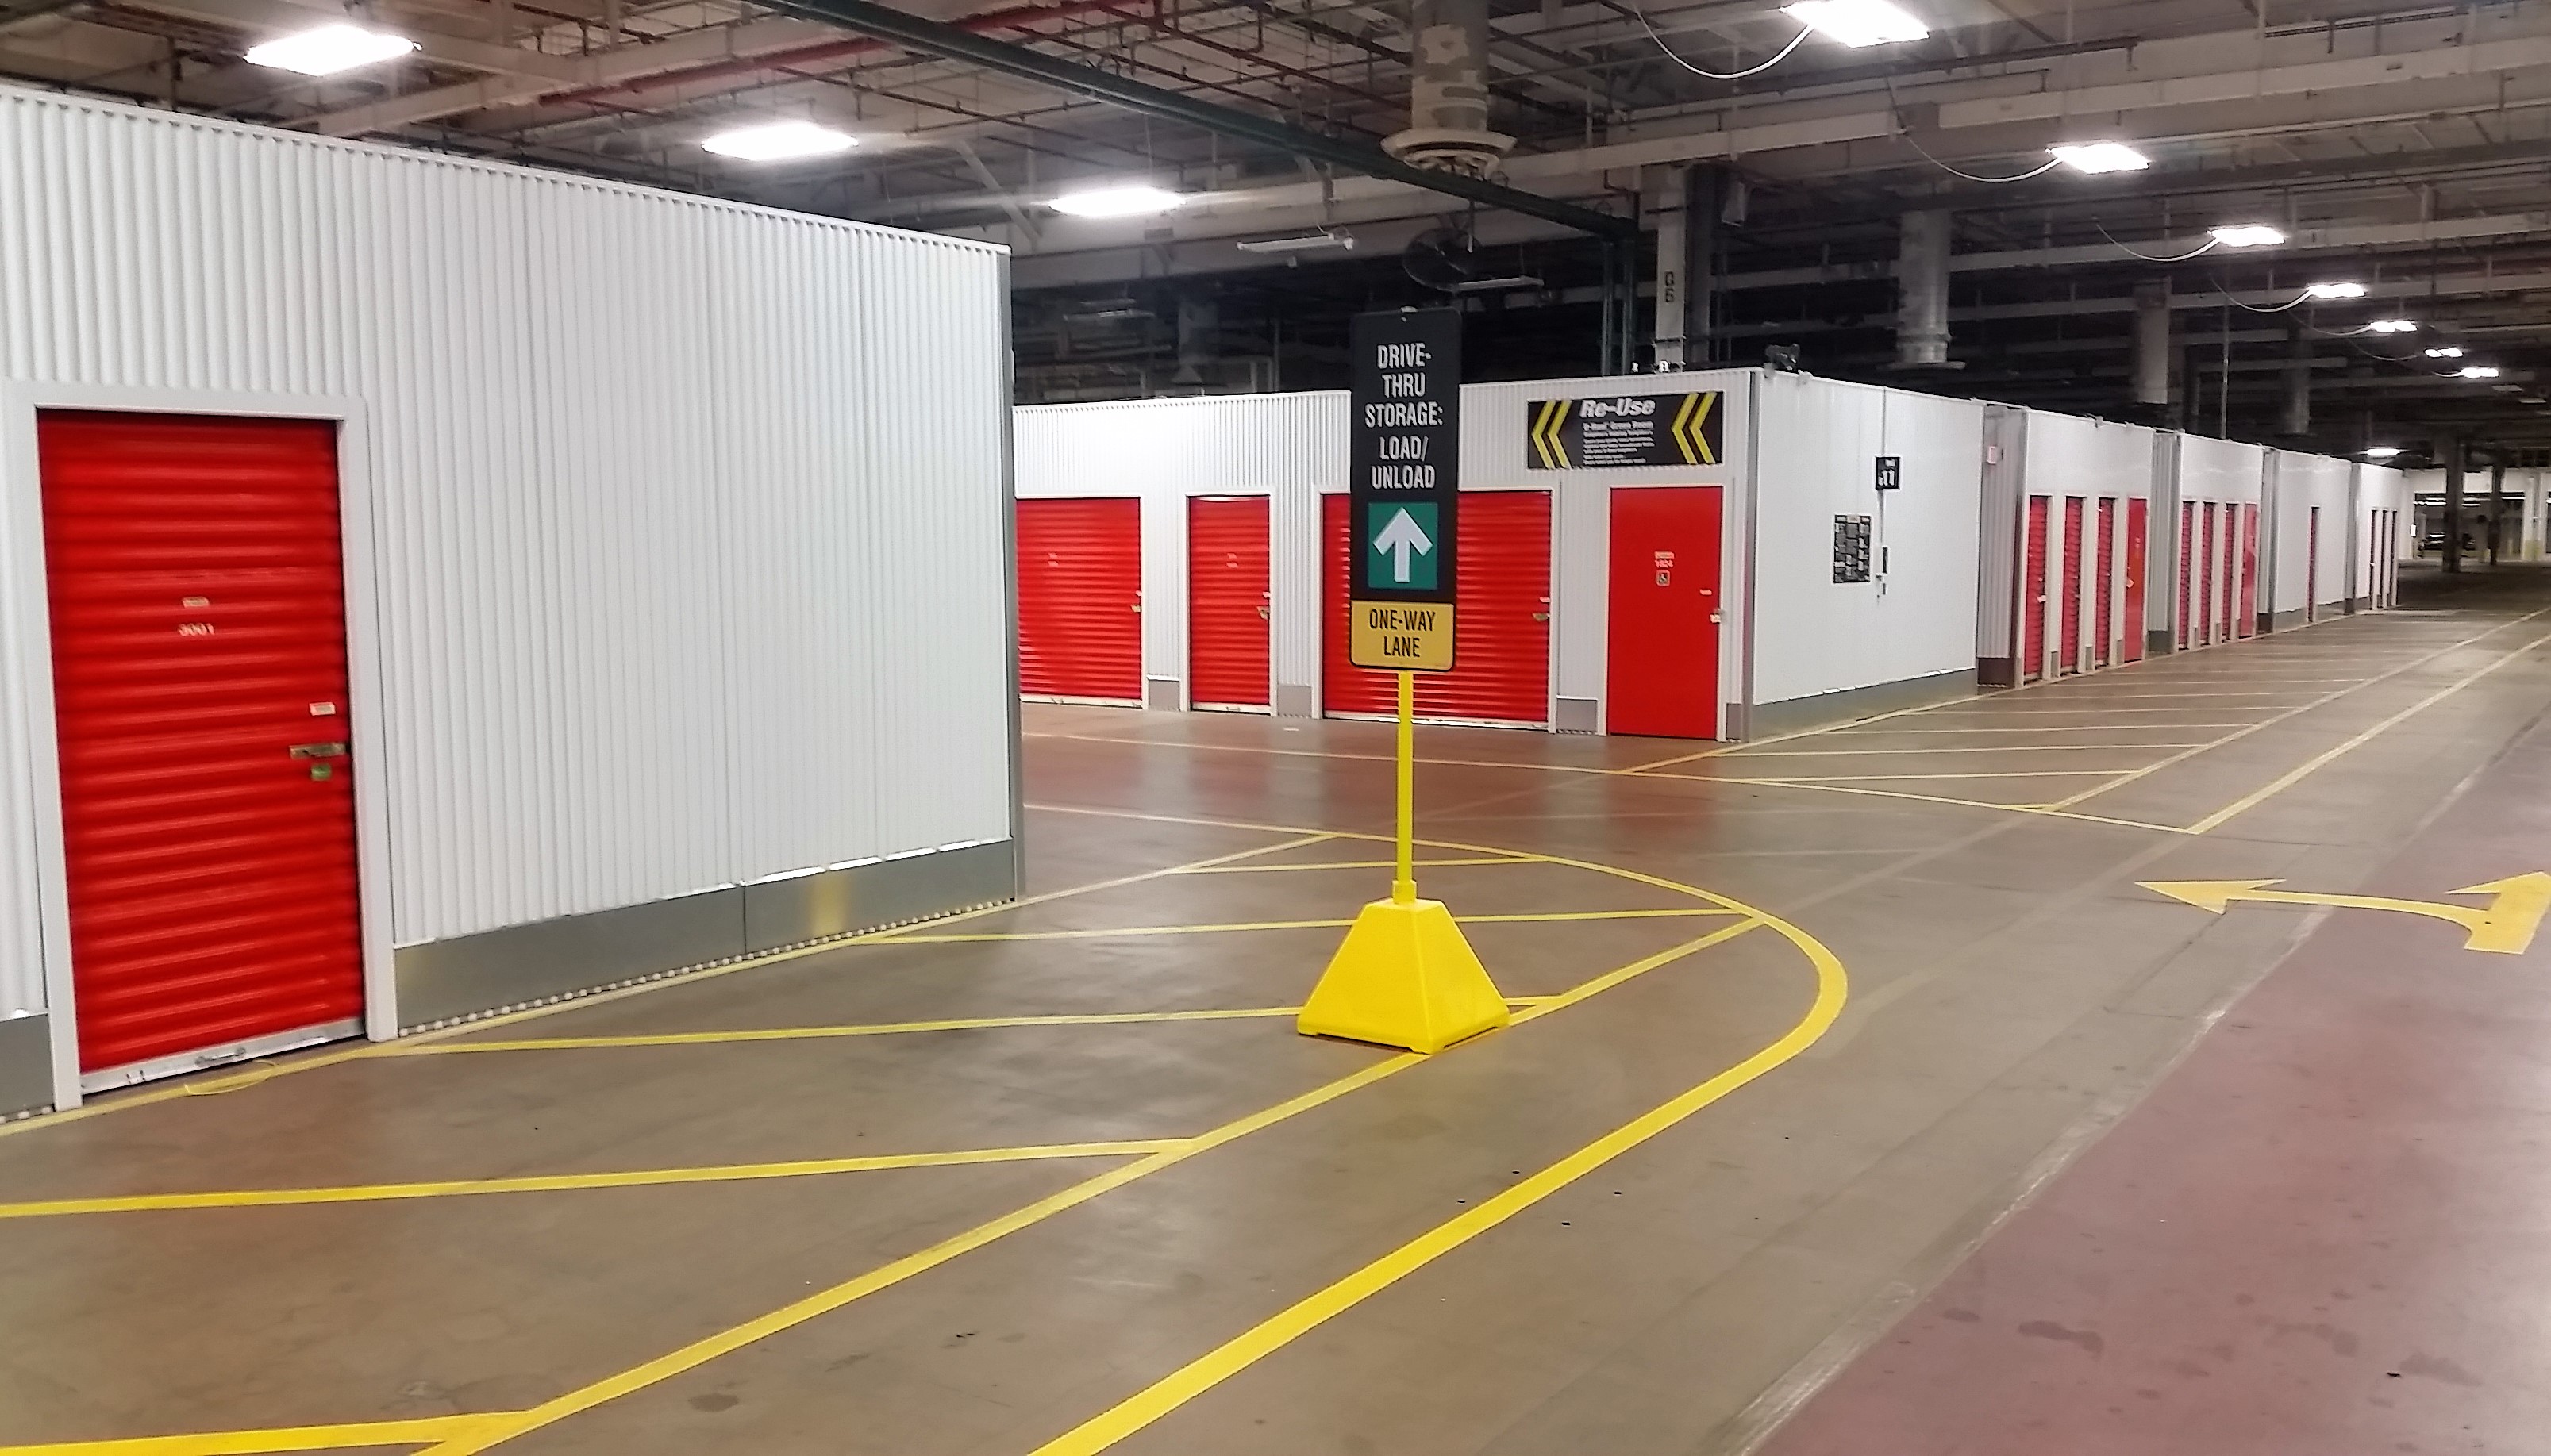 U-Haul Moving and Storage of Currie Park is one of 14 stores in the Greater Milwaukee area offering the 30 days free self-storage disaster relief program.